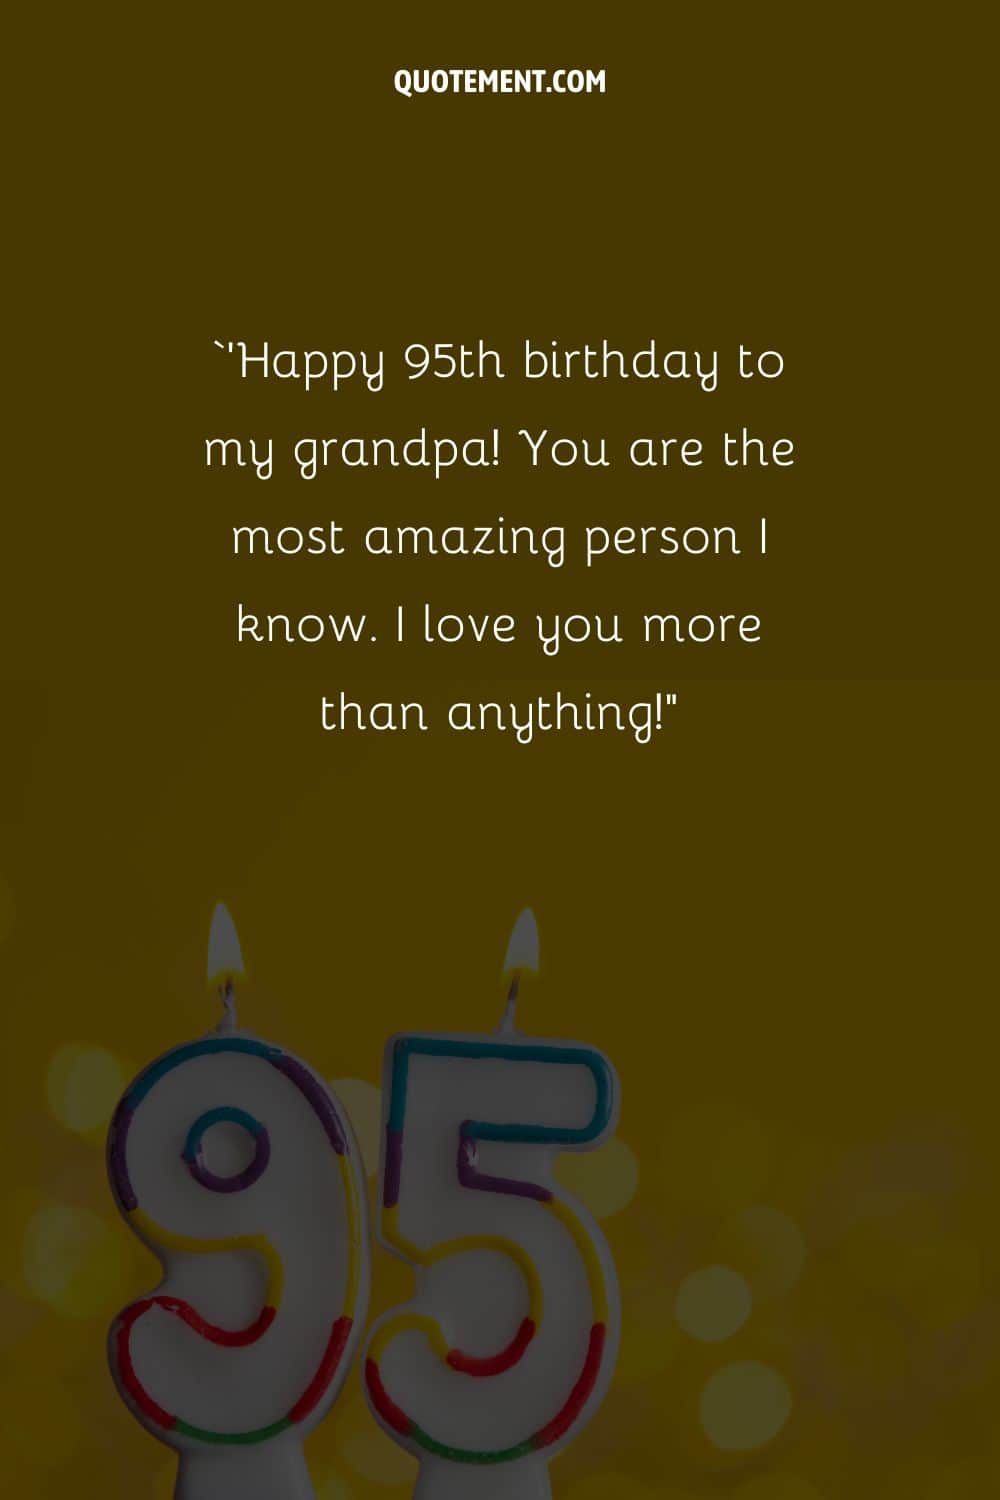 ‘’Happy 95th birthday to my grandpa! You are the most amazing person I know. I love you more than anything!”